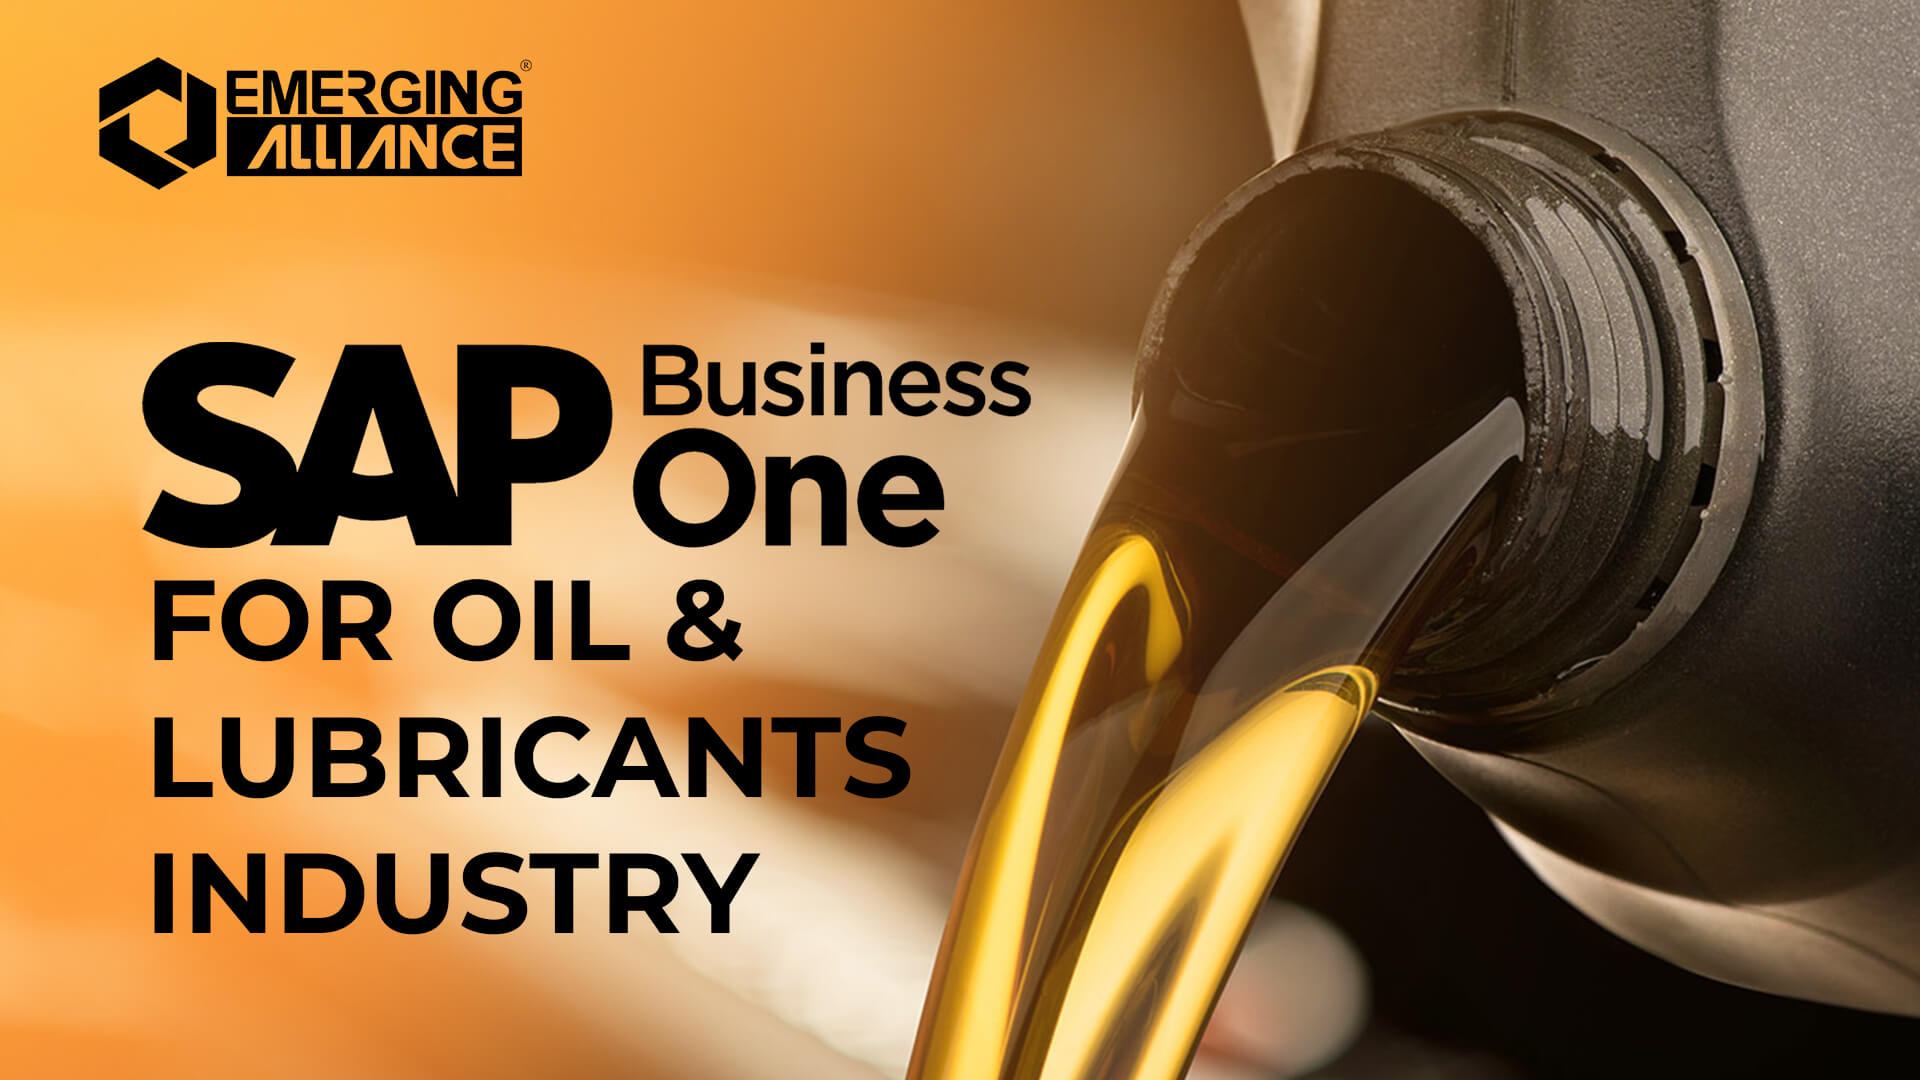 sap business one for oil & lubricants industry